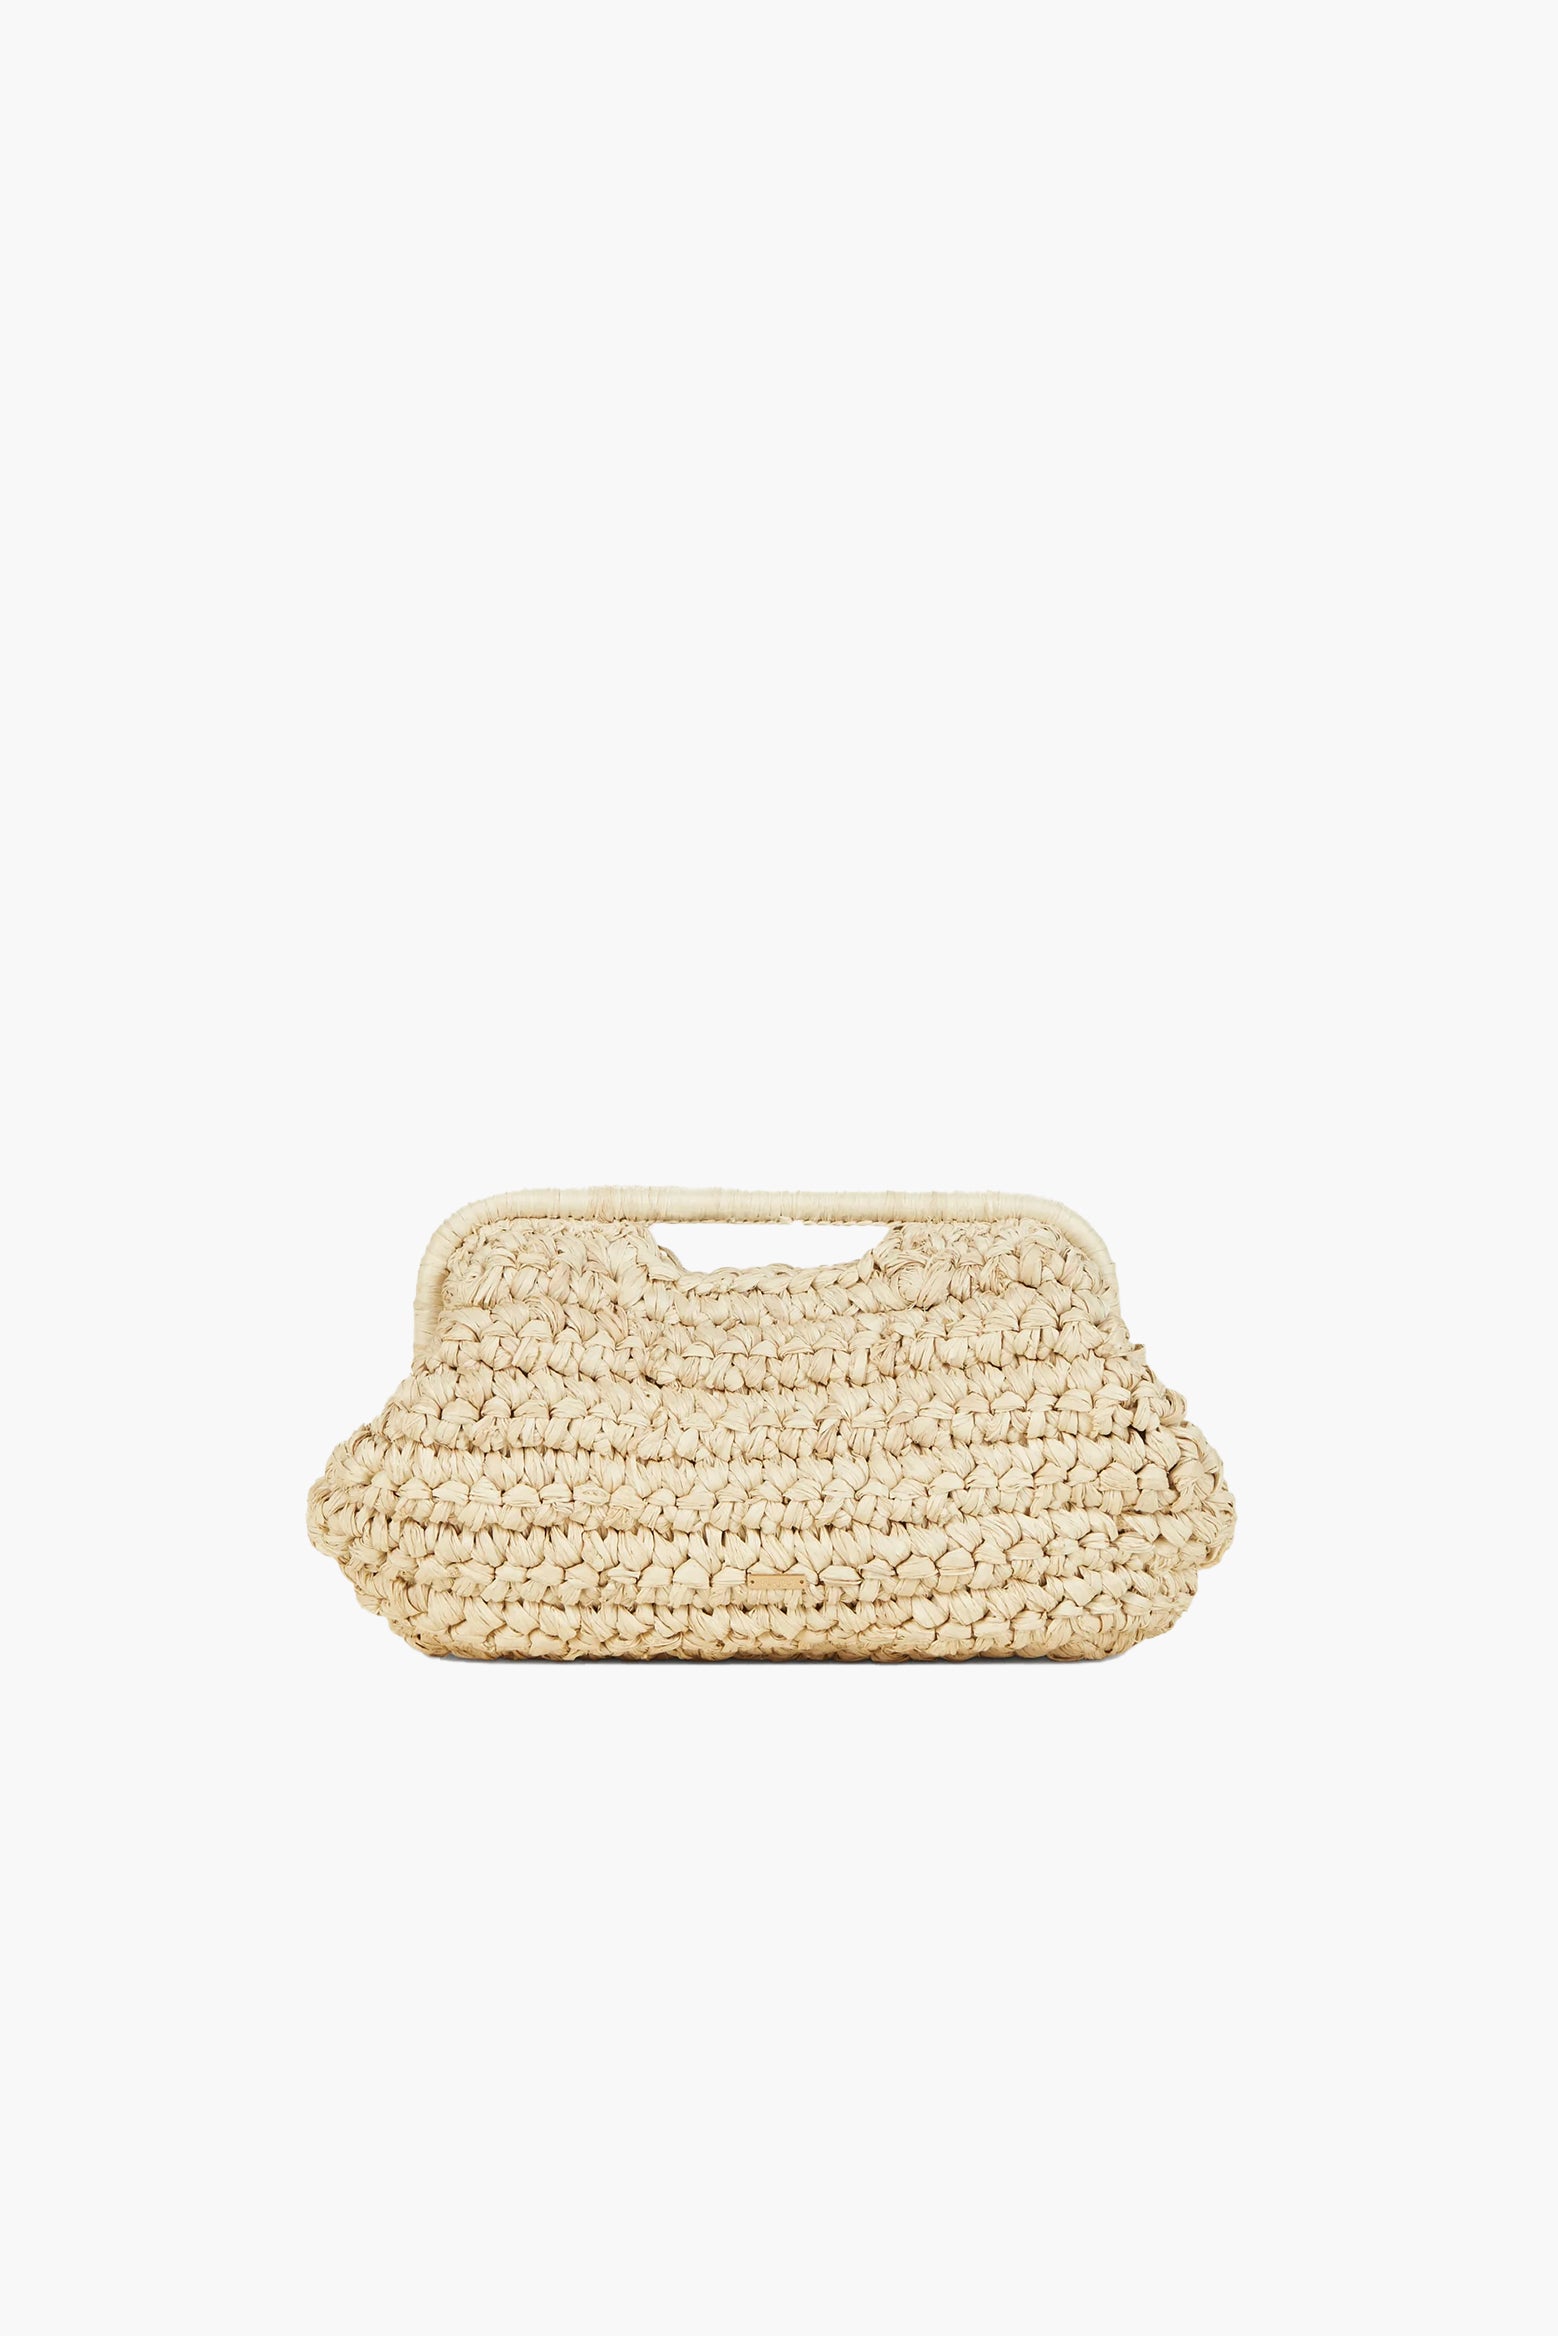 The Cult Gaia Aurora Large Clutch in Natural available at The New Trend Australia